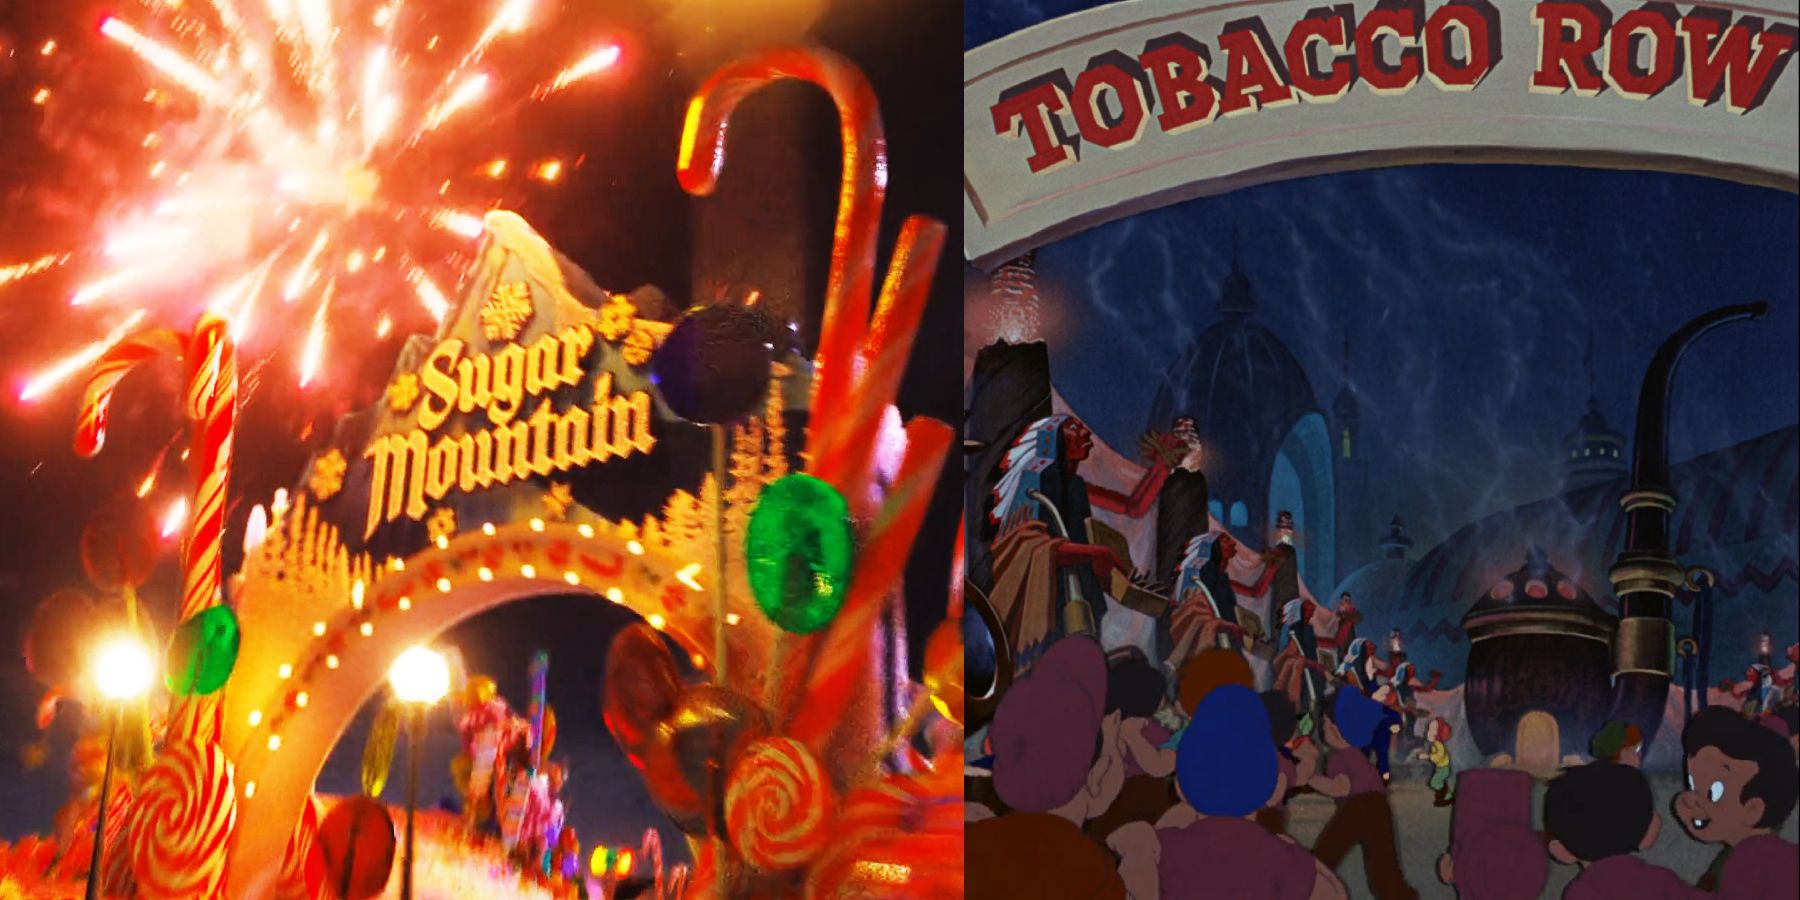 Sugar Mountain replaces Tobacco Row in the Pinocchio remake